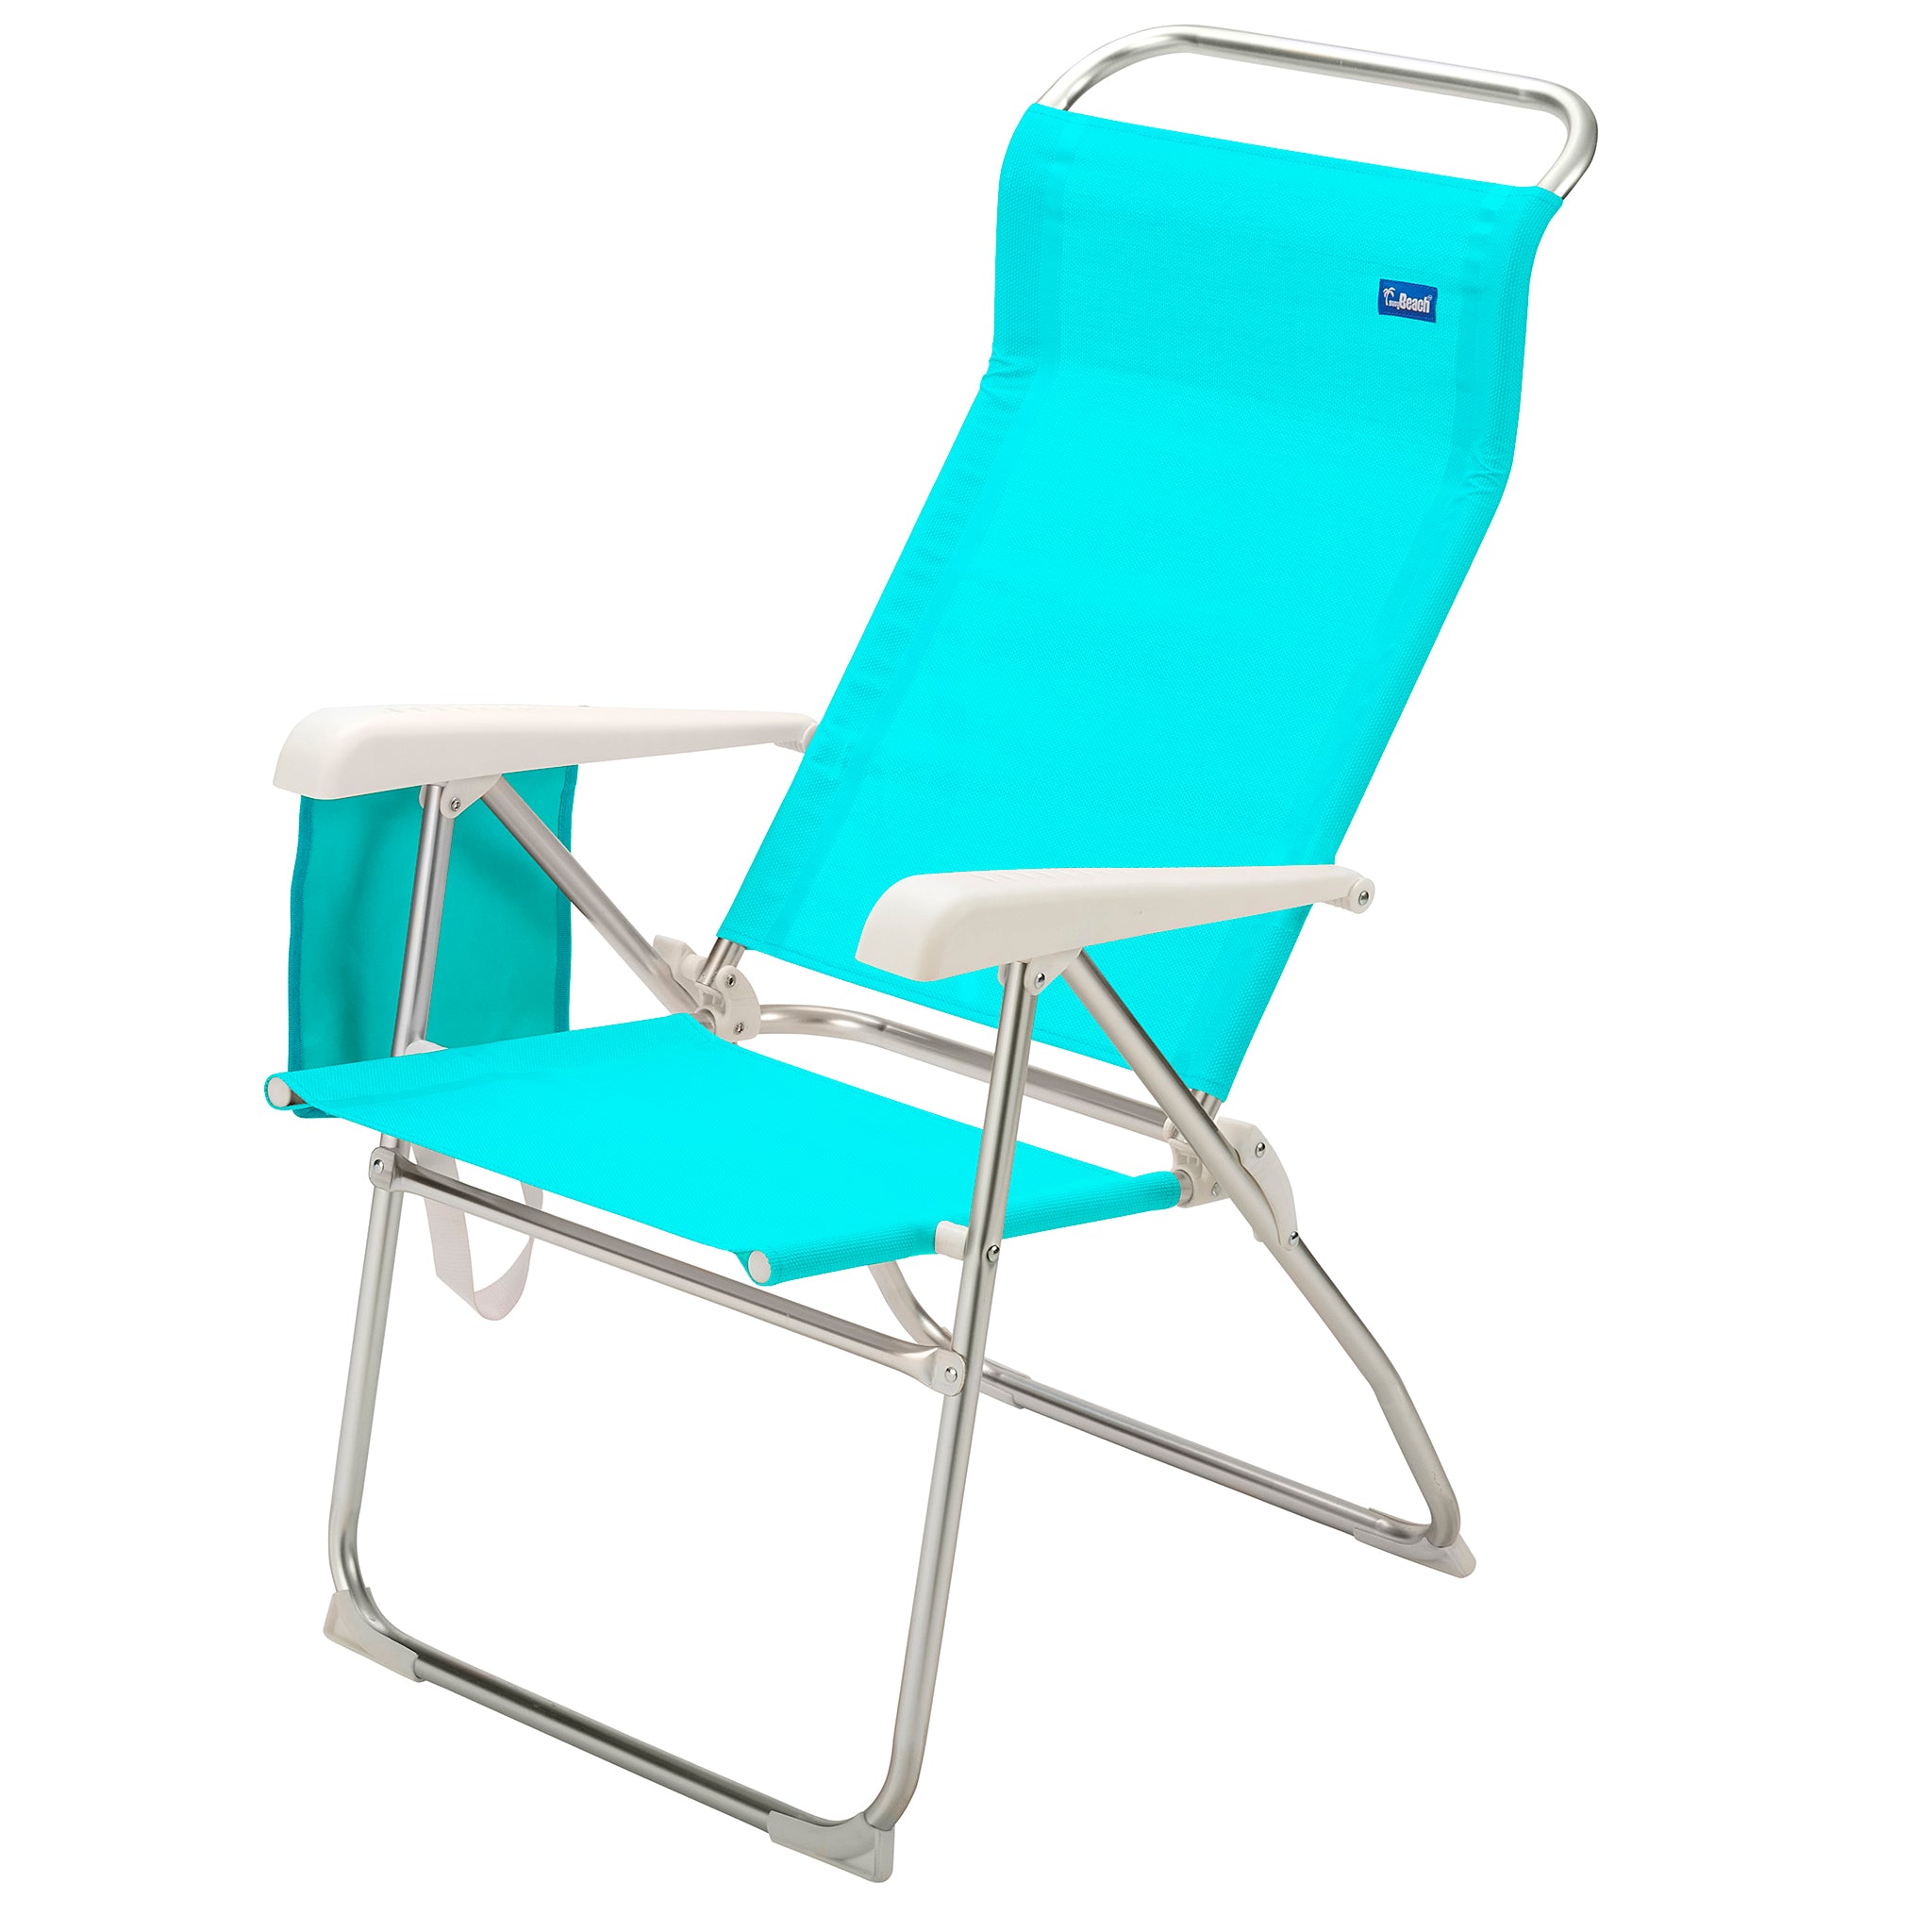 Set of Two (2) Tall 8-Postion Beach Chairs